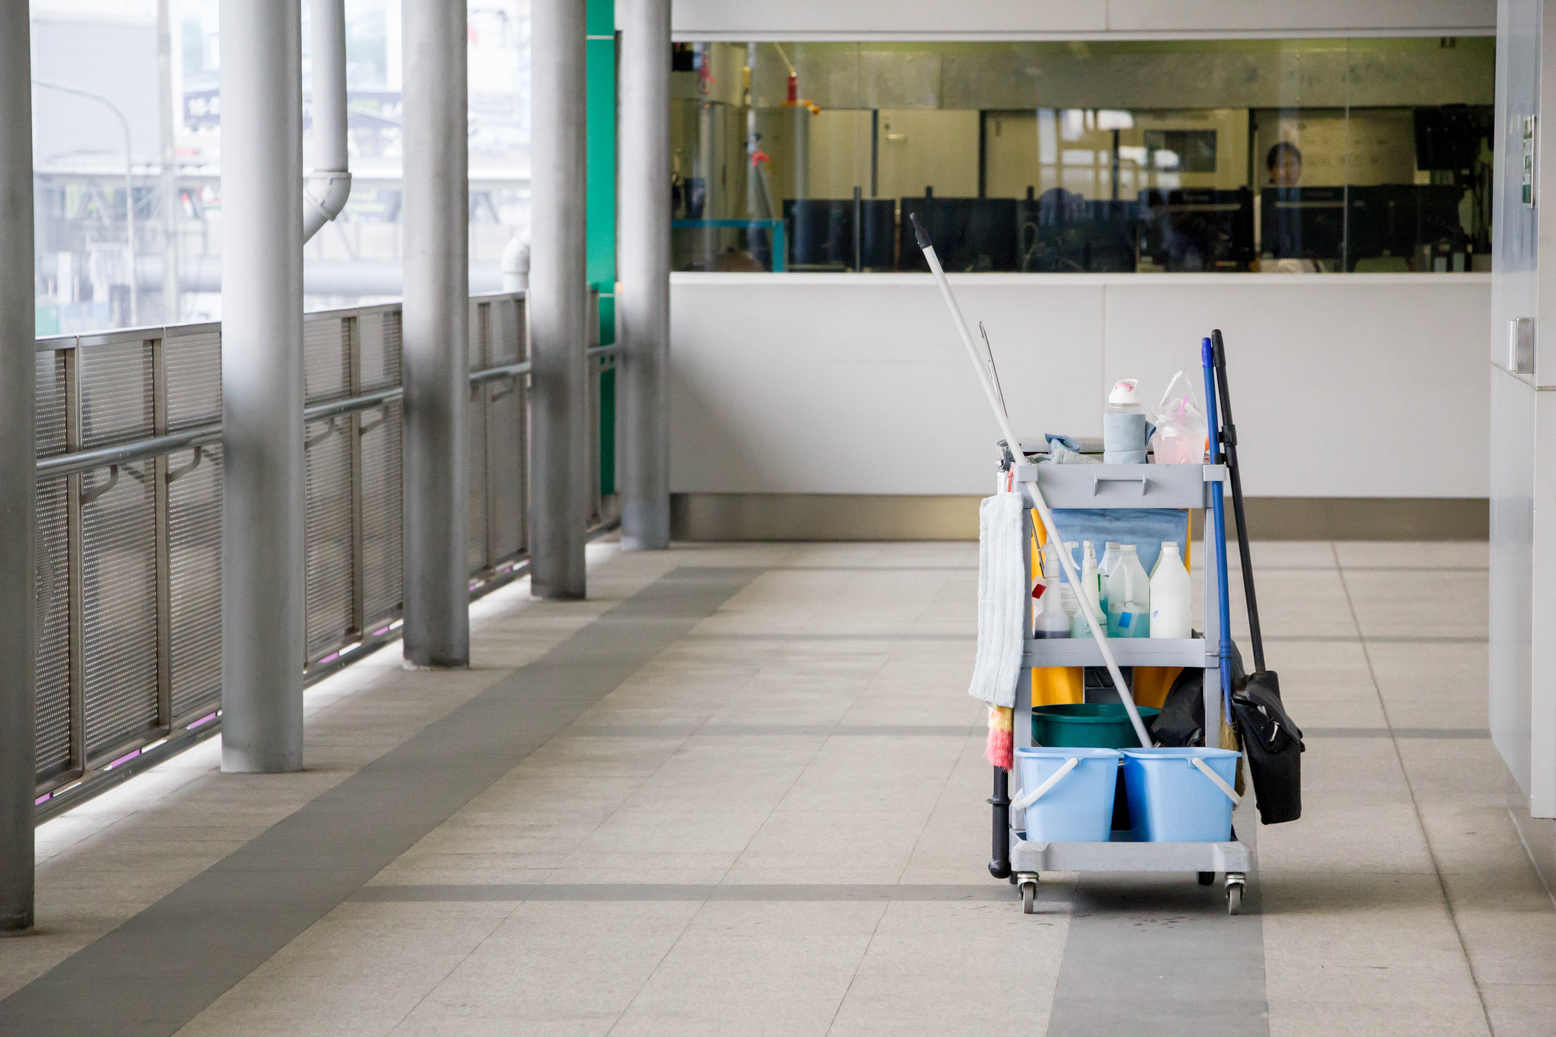 Cleaning equipment in cart on the floor.